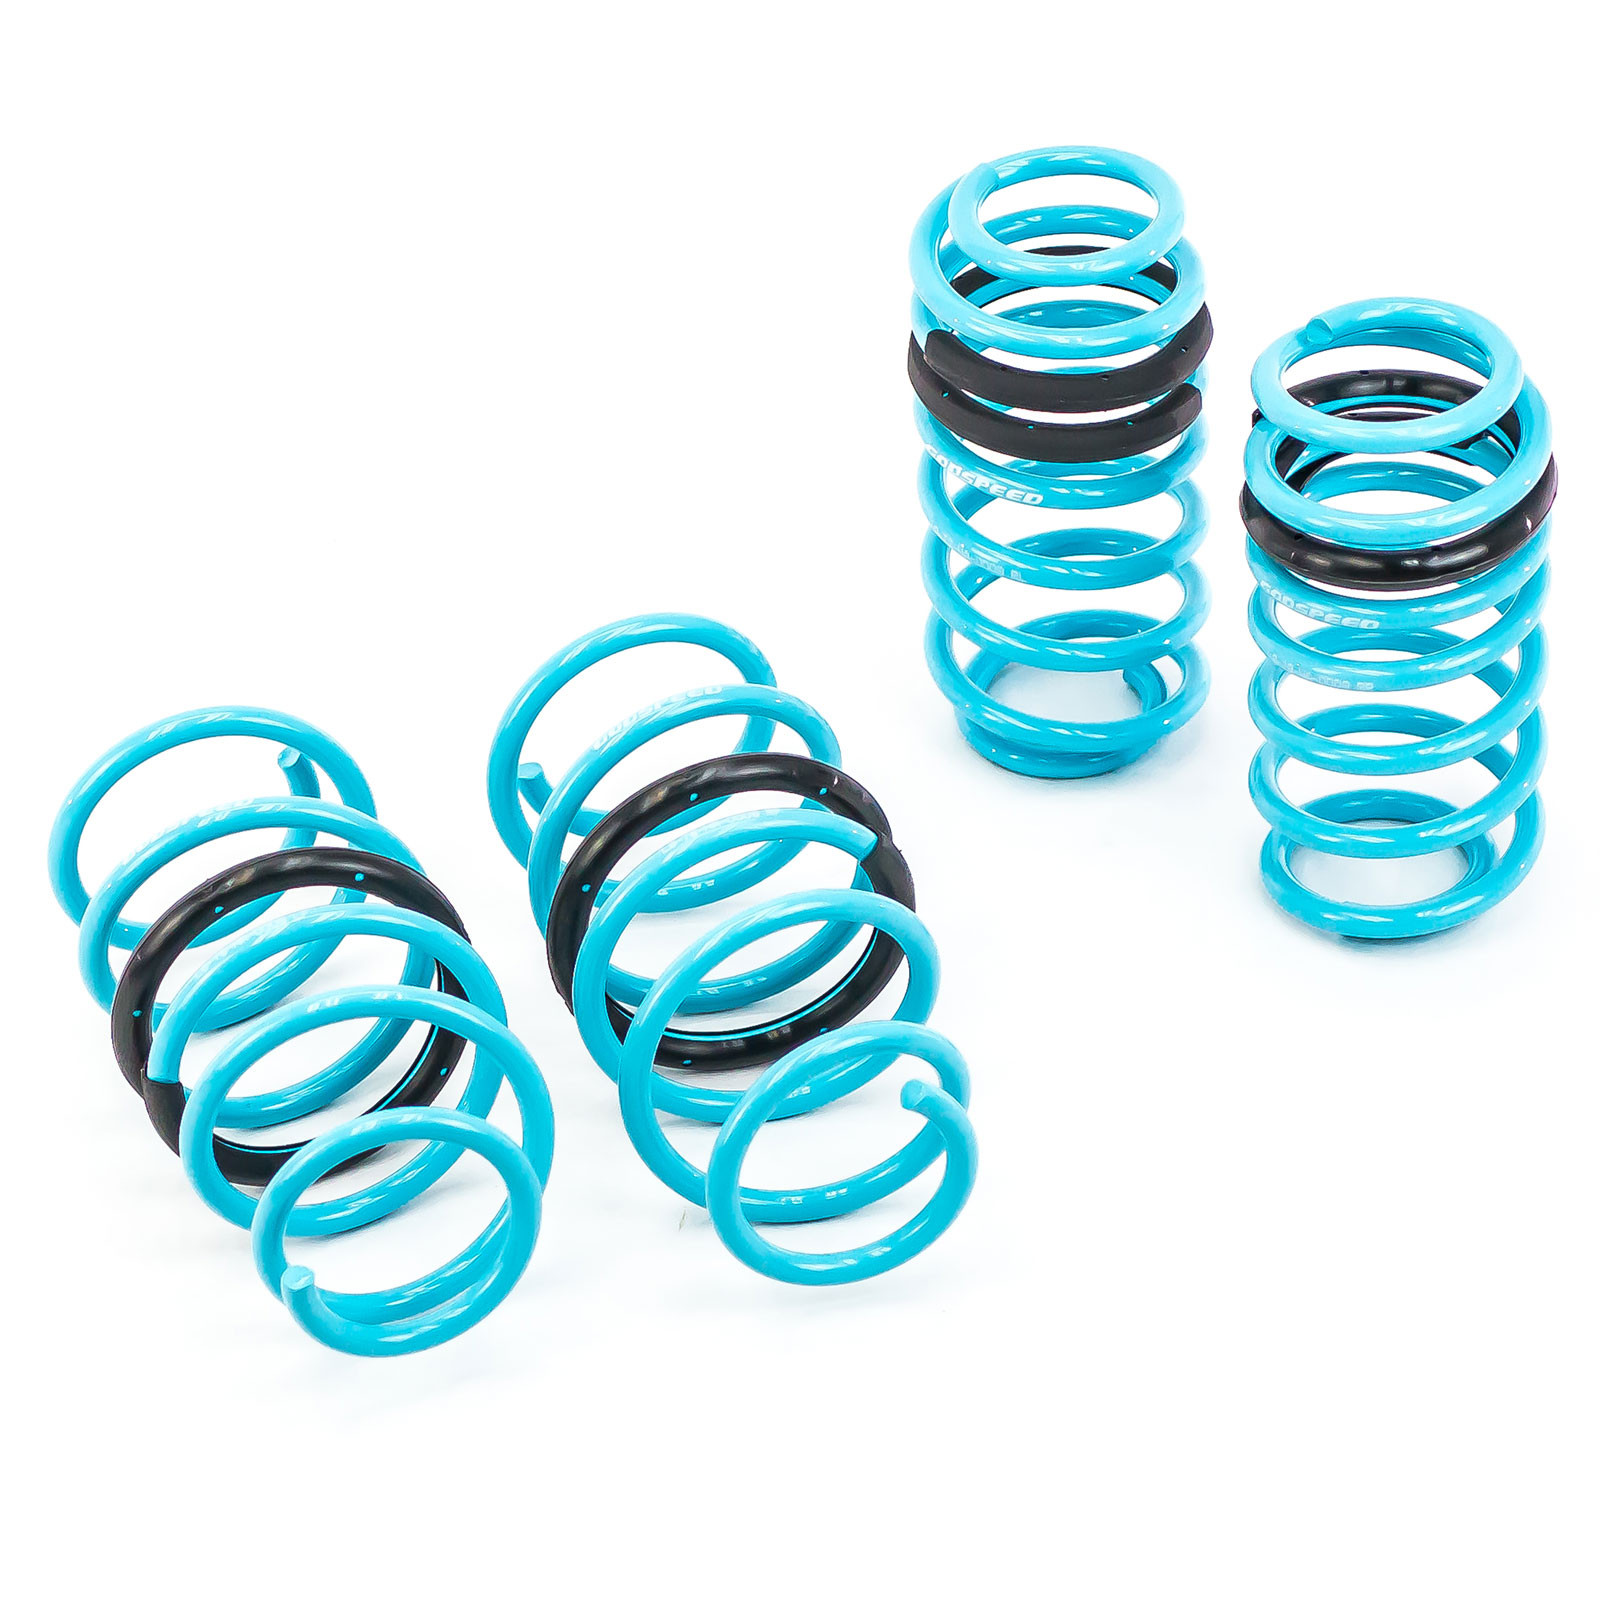 GODSPEED TRACTION-S LOWERING SPRINGS FOR HONDA CIVIC DX LX EX SI 2012-2015 FG/FB 